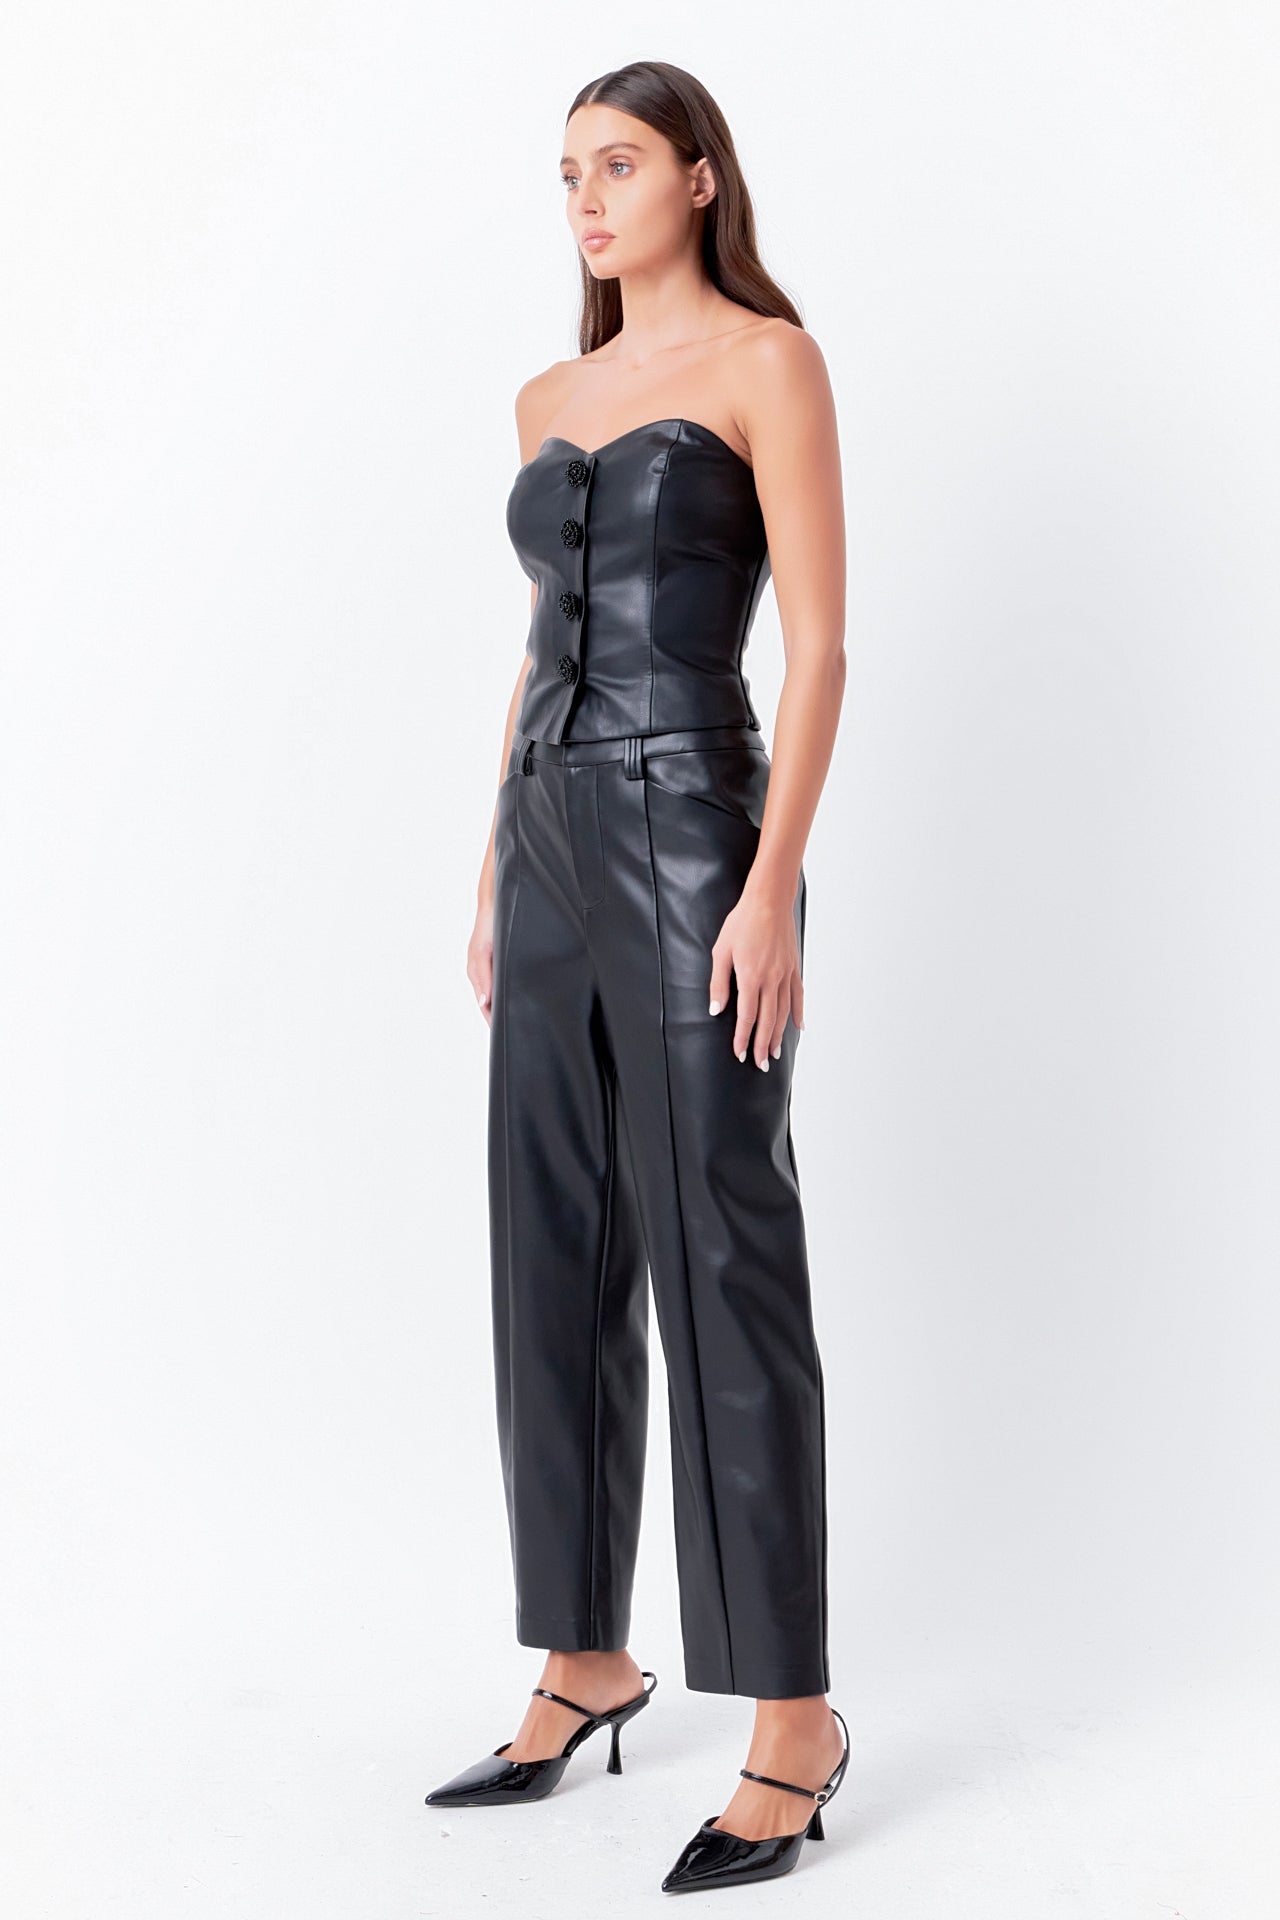 ENDLESS ROSE - Faux Leather Strapless Top - TOPS available at Objectrare